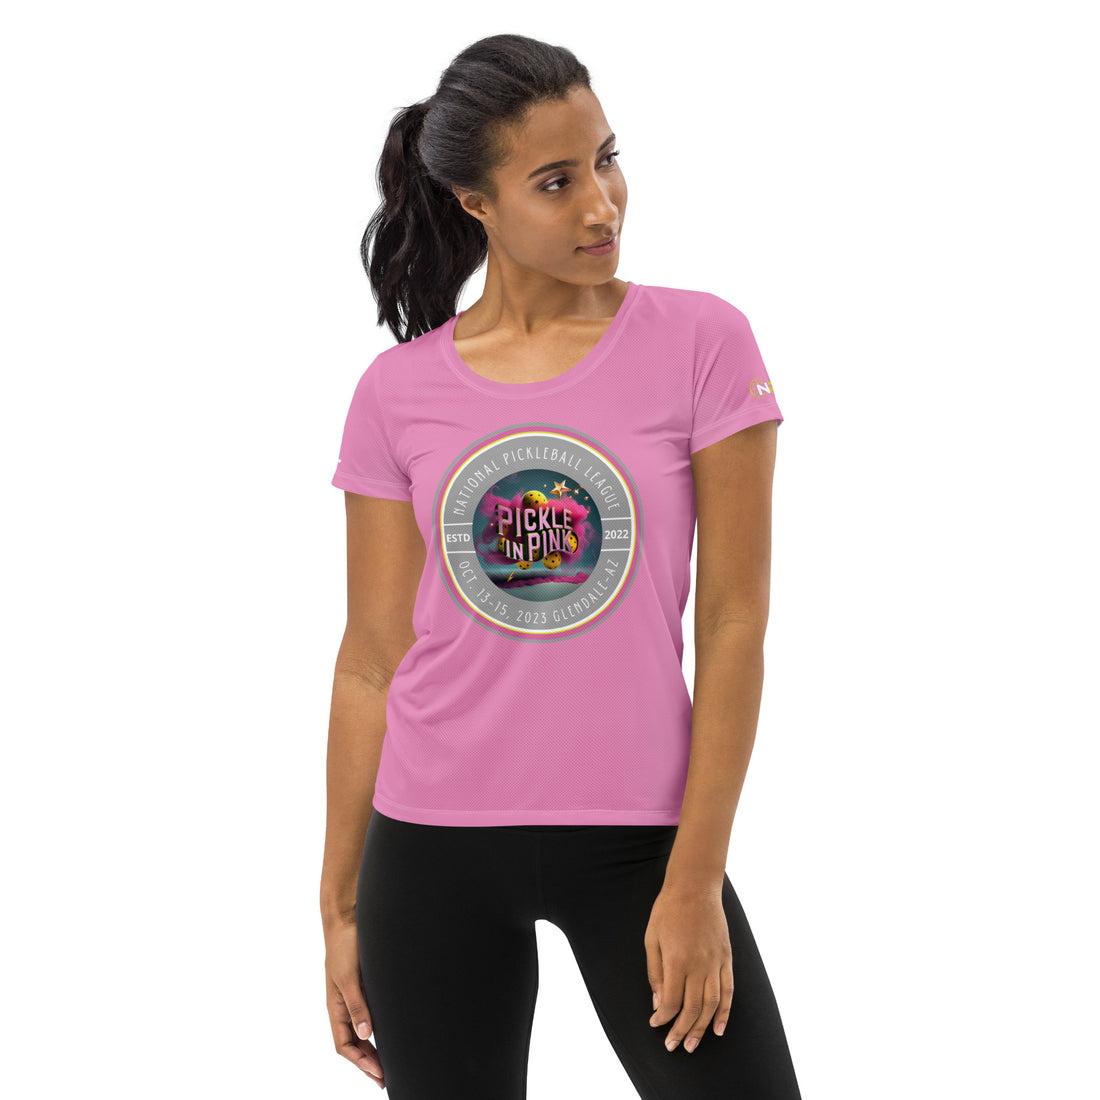 NPL™ "Pickle in Pink" Women's Performance Short Sleeve Shirt - Where Comfort Meets Style!